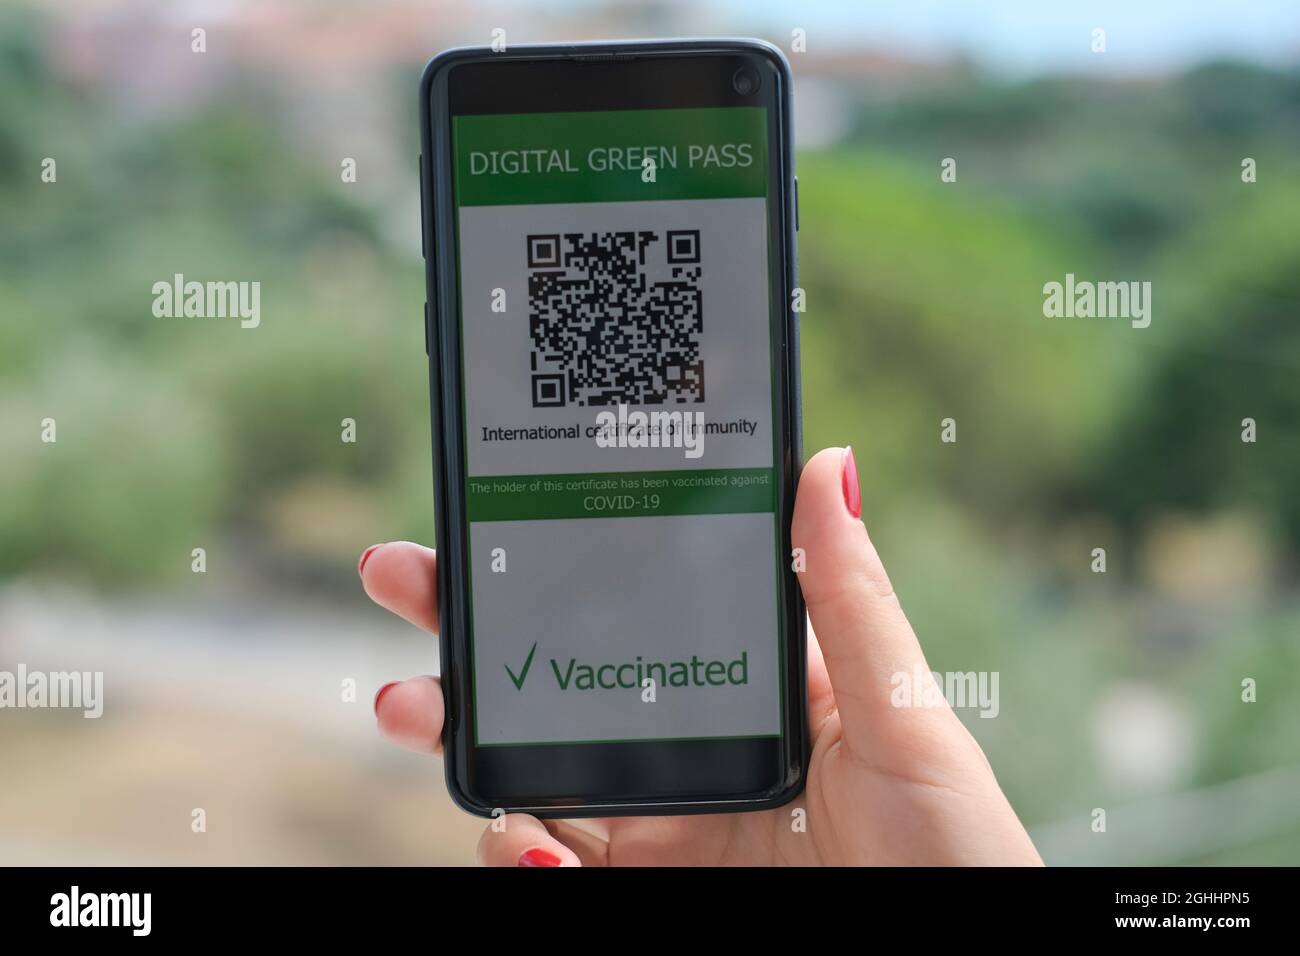 Woman hold covid19 vaccine qr code green pass certificate on a smartphone,tech Stock Photo